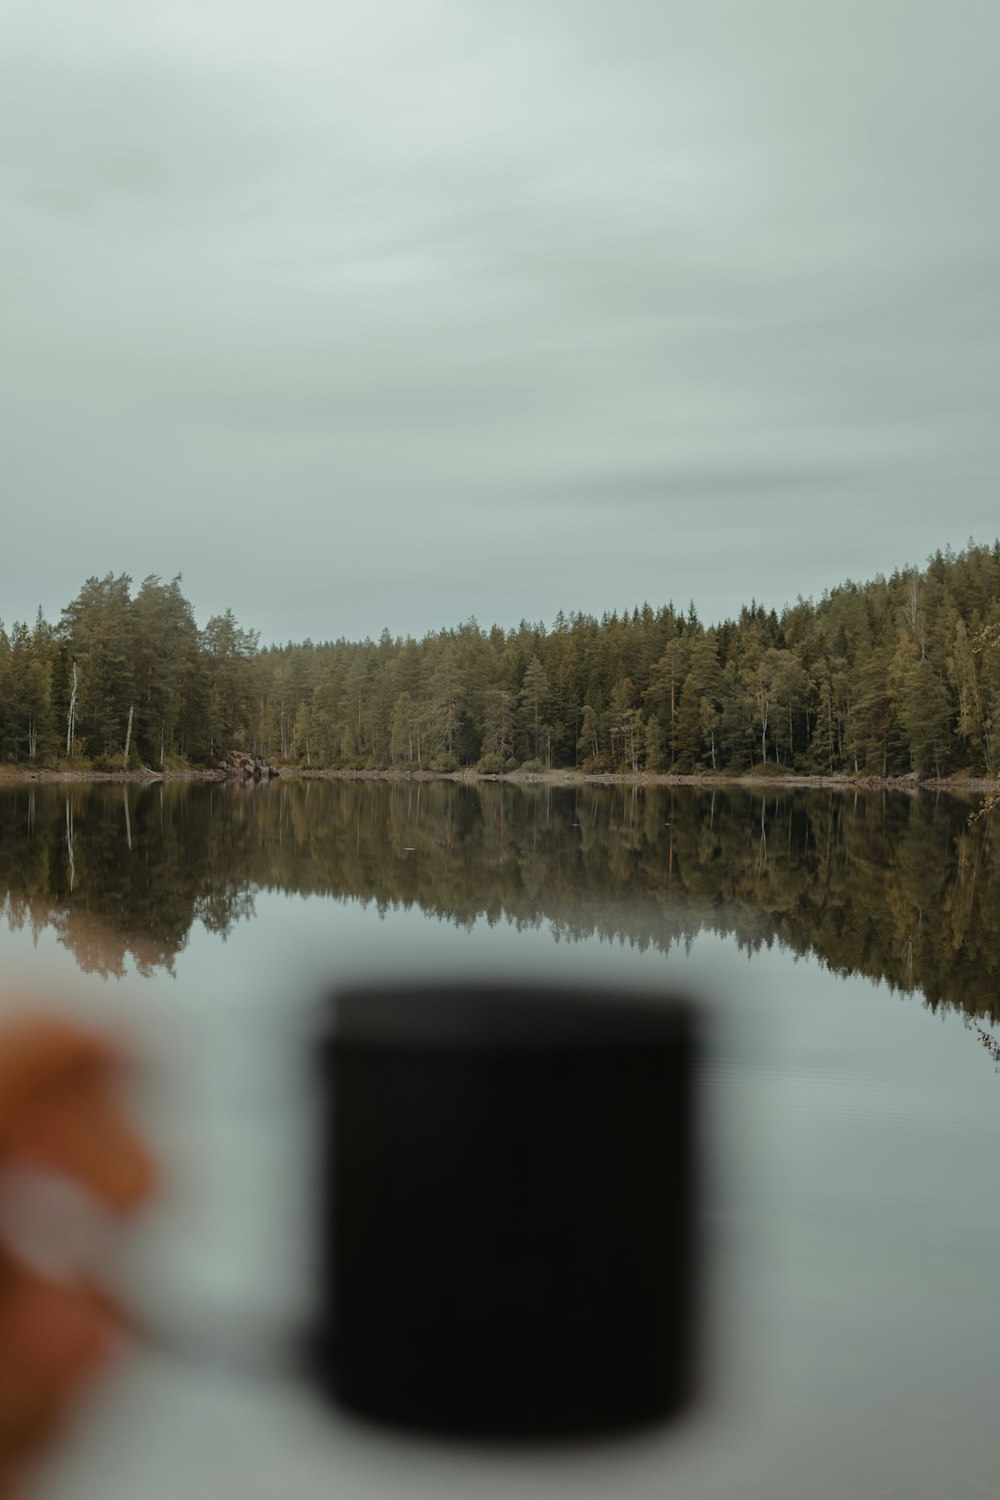 a person taking a picture of a lake with trees in the background